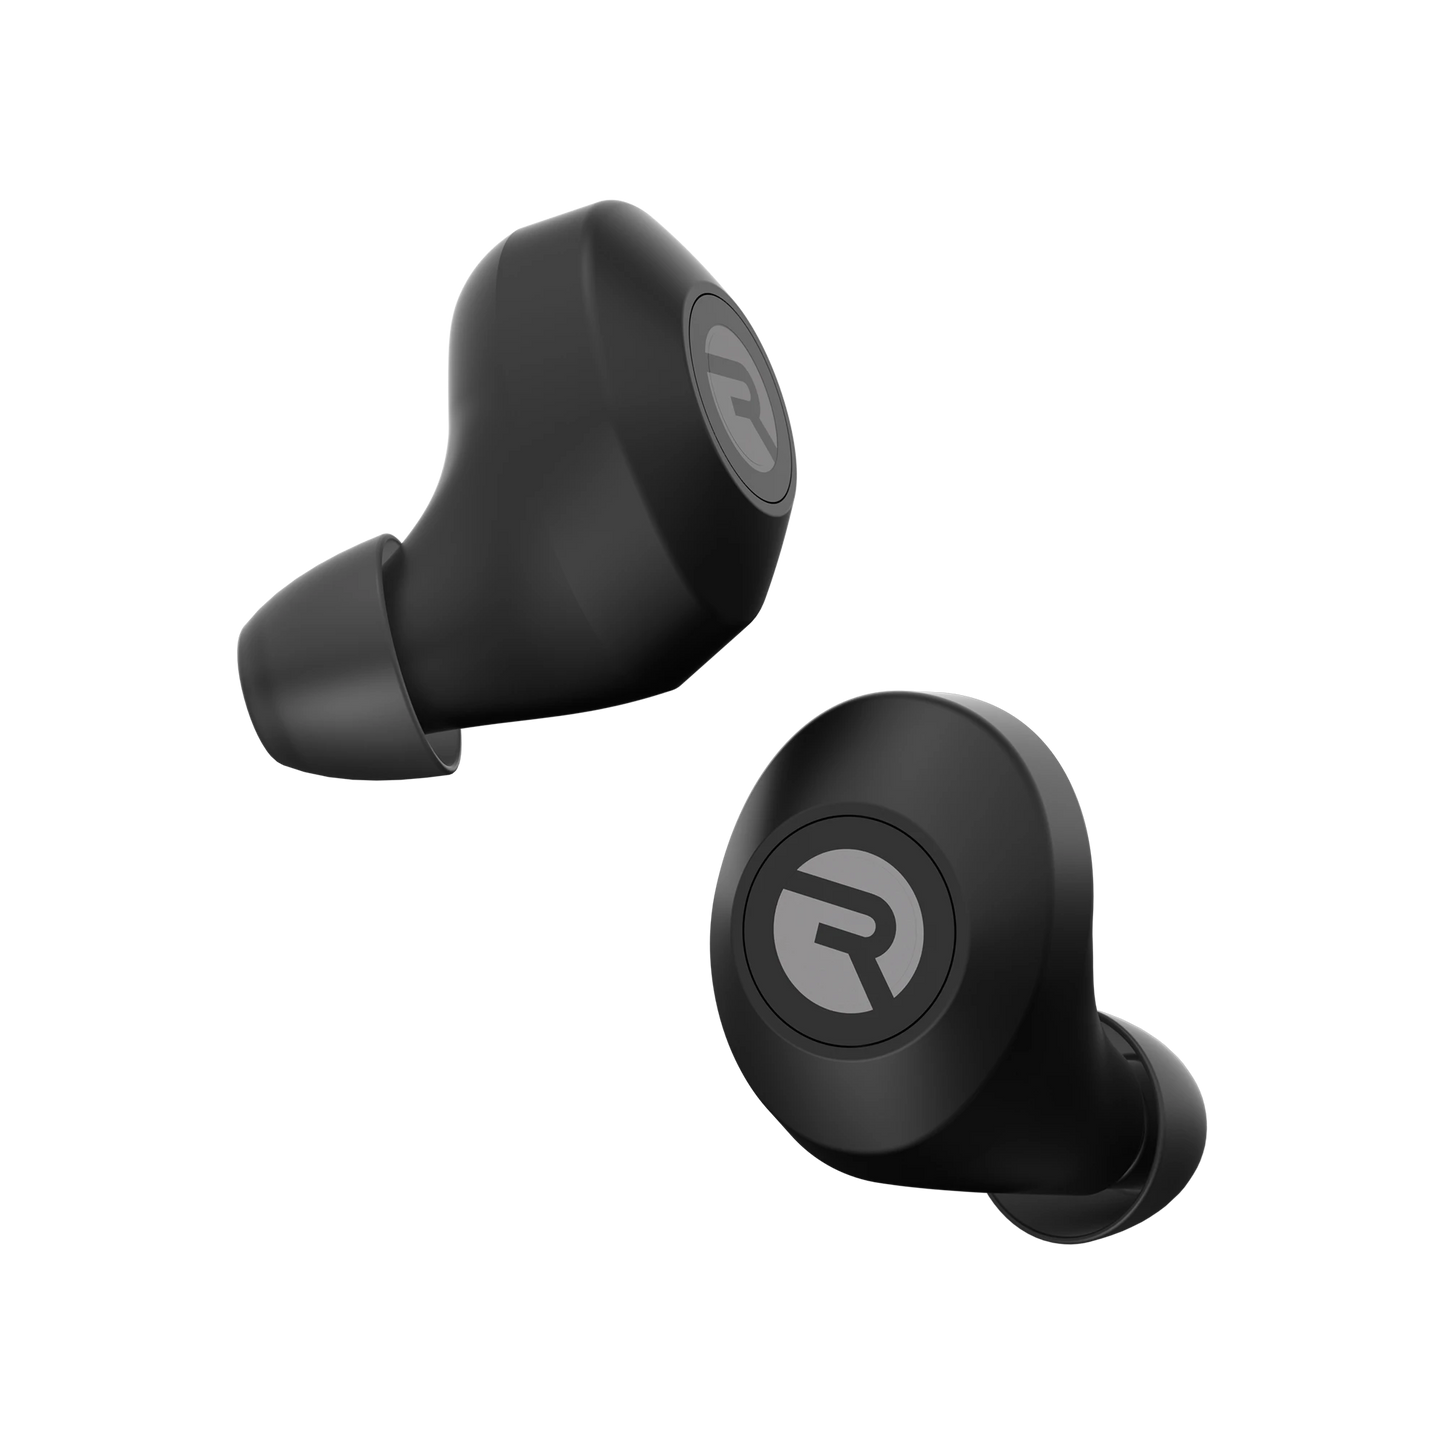 PODS Wireless Earbuds with Touch Control - True Wireless Earbuds w/Mic  USB-C Charging, Ear Buds Wireless Headphones with Bluetooth 5.0 Stereo  Sound 